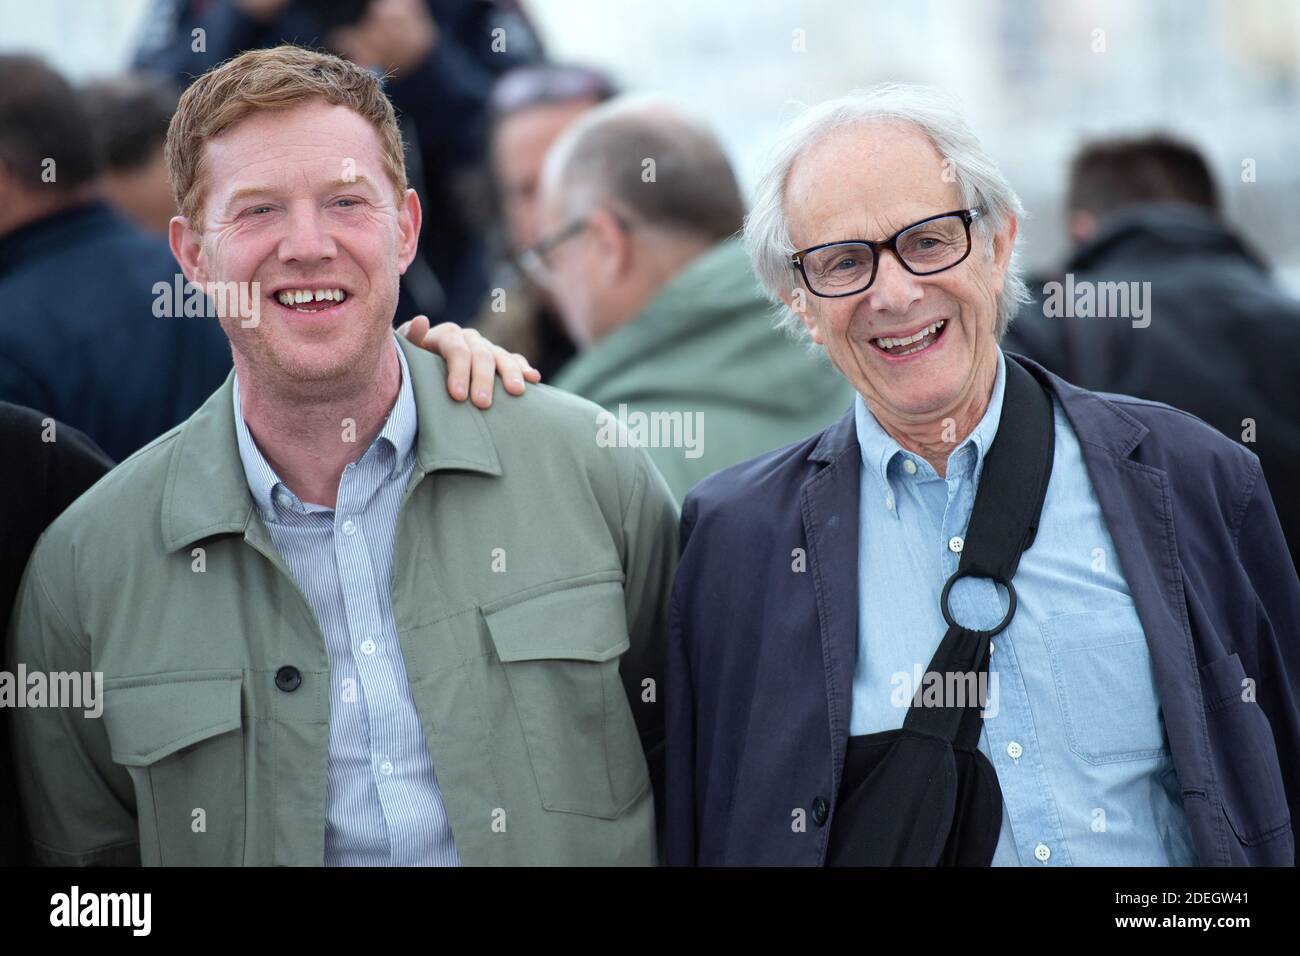 Kris Hitchen and Ken Loach attending the Sorry We Missed You Photocall as part of the 72nd Cannes International Film Festival in Cannes, France on May 17, 2019. Photo by Aurore Marechal/ABACAPRESS.COM Stock Photo